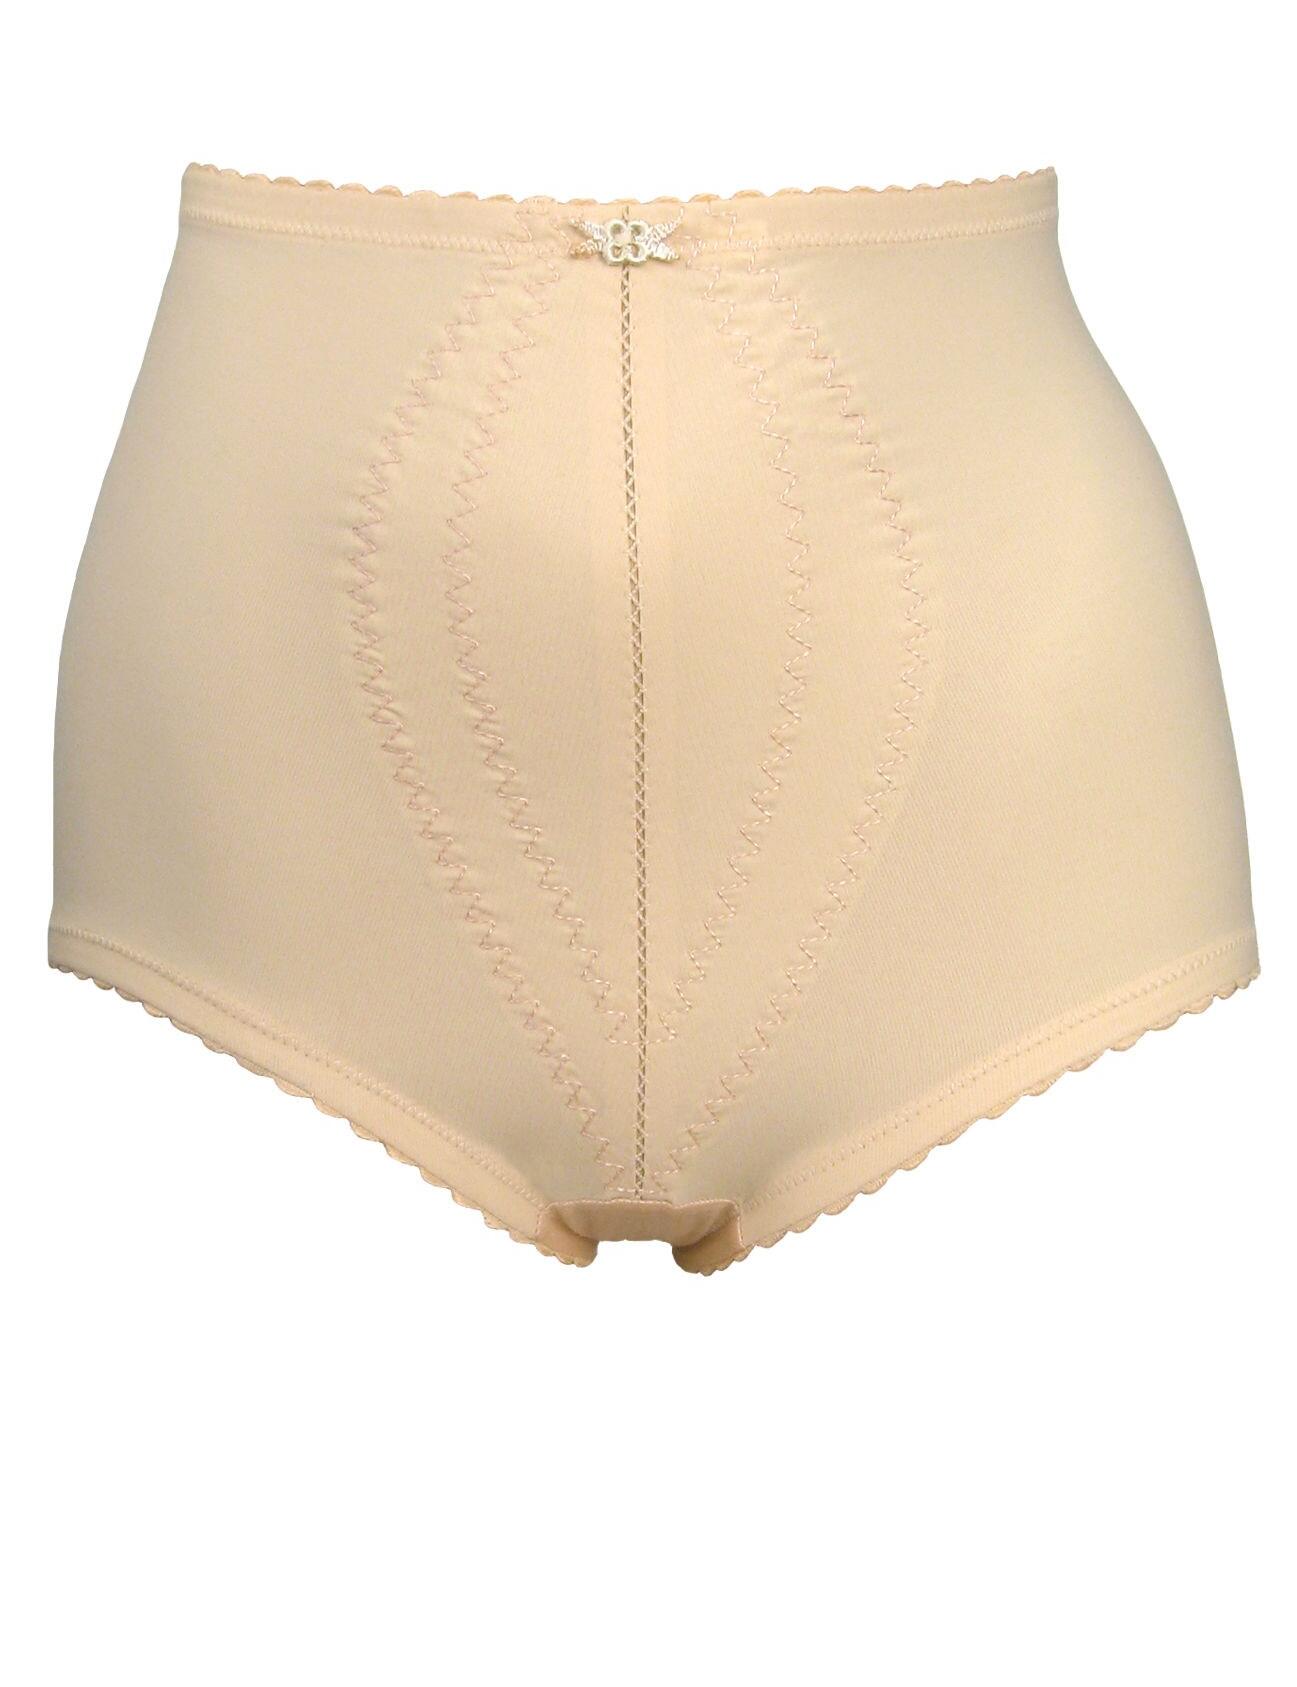 Playtex I Can't Believe it's a Girdle : Firm Control Brief P2522 - Beige